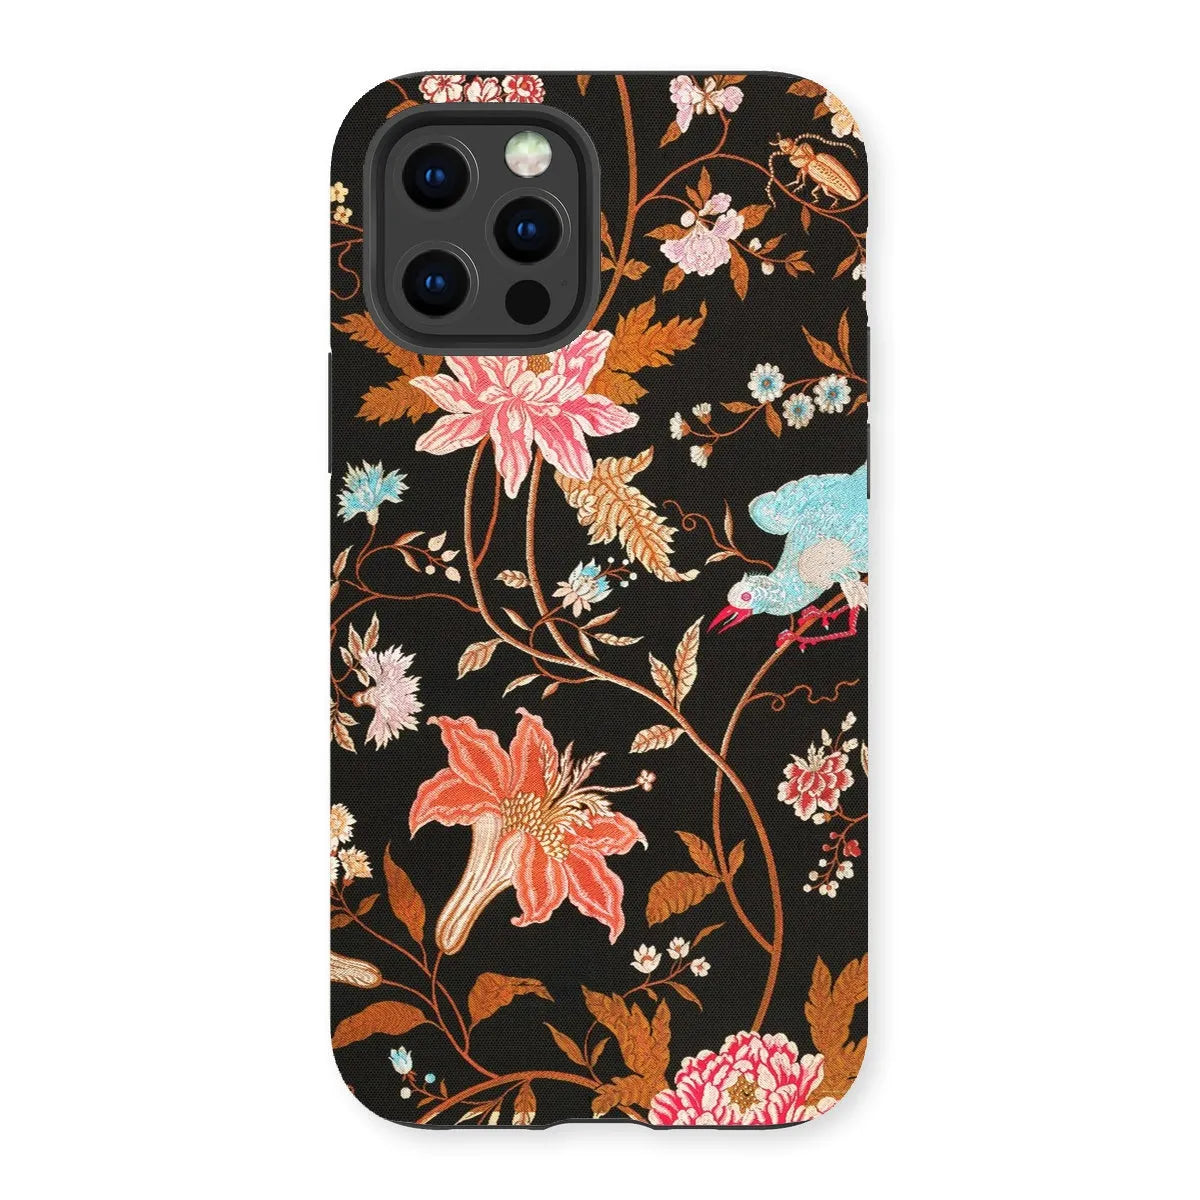 Midnight Call - Indian Aesthetic Fabric Art Phone Case - Iphone 13 Pro / Matte - Mobile Phone Cases - Aesthetic Art